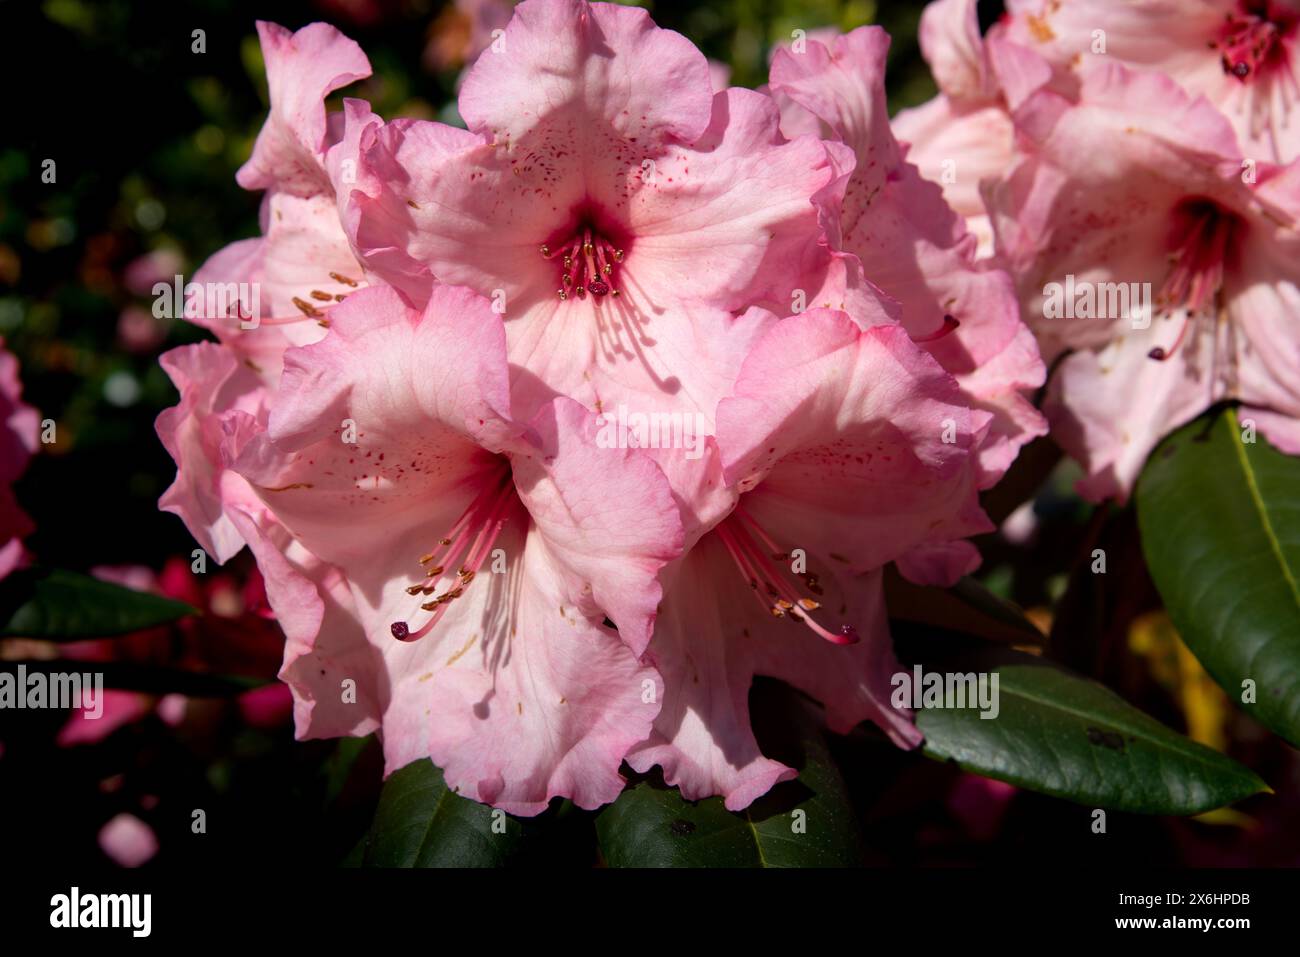 Rhododendron with a pink flowers blossom in the garden, close up, cultivation in Ireland Stock Photo